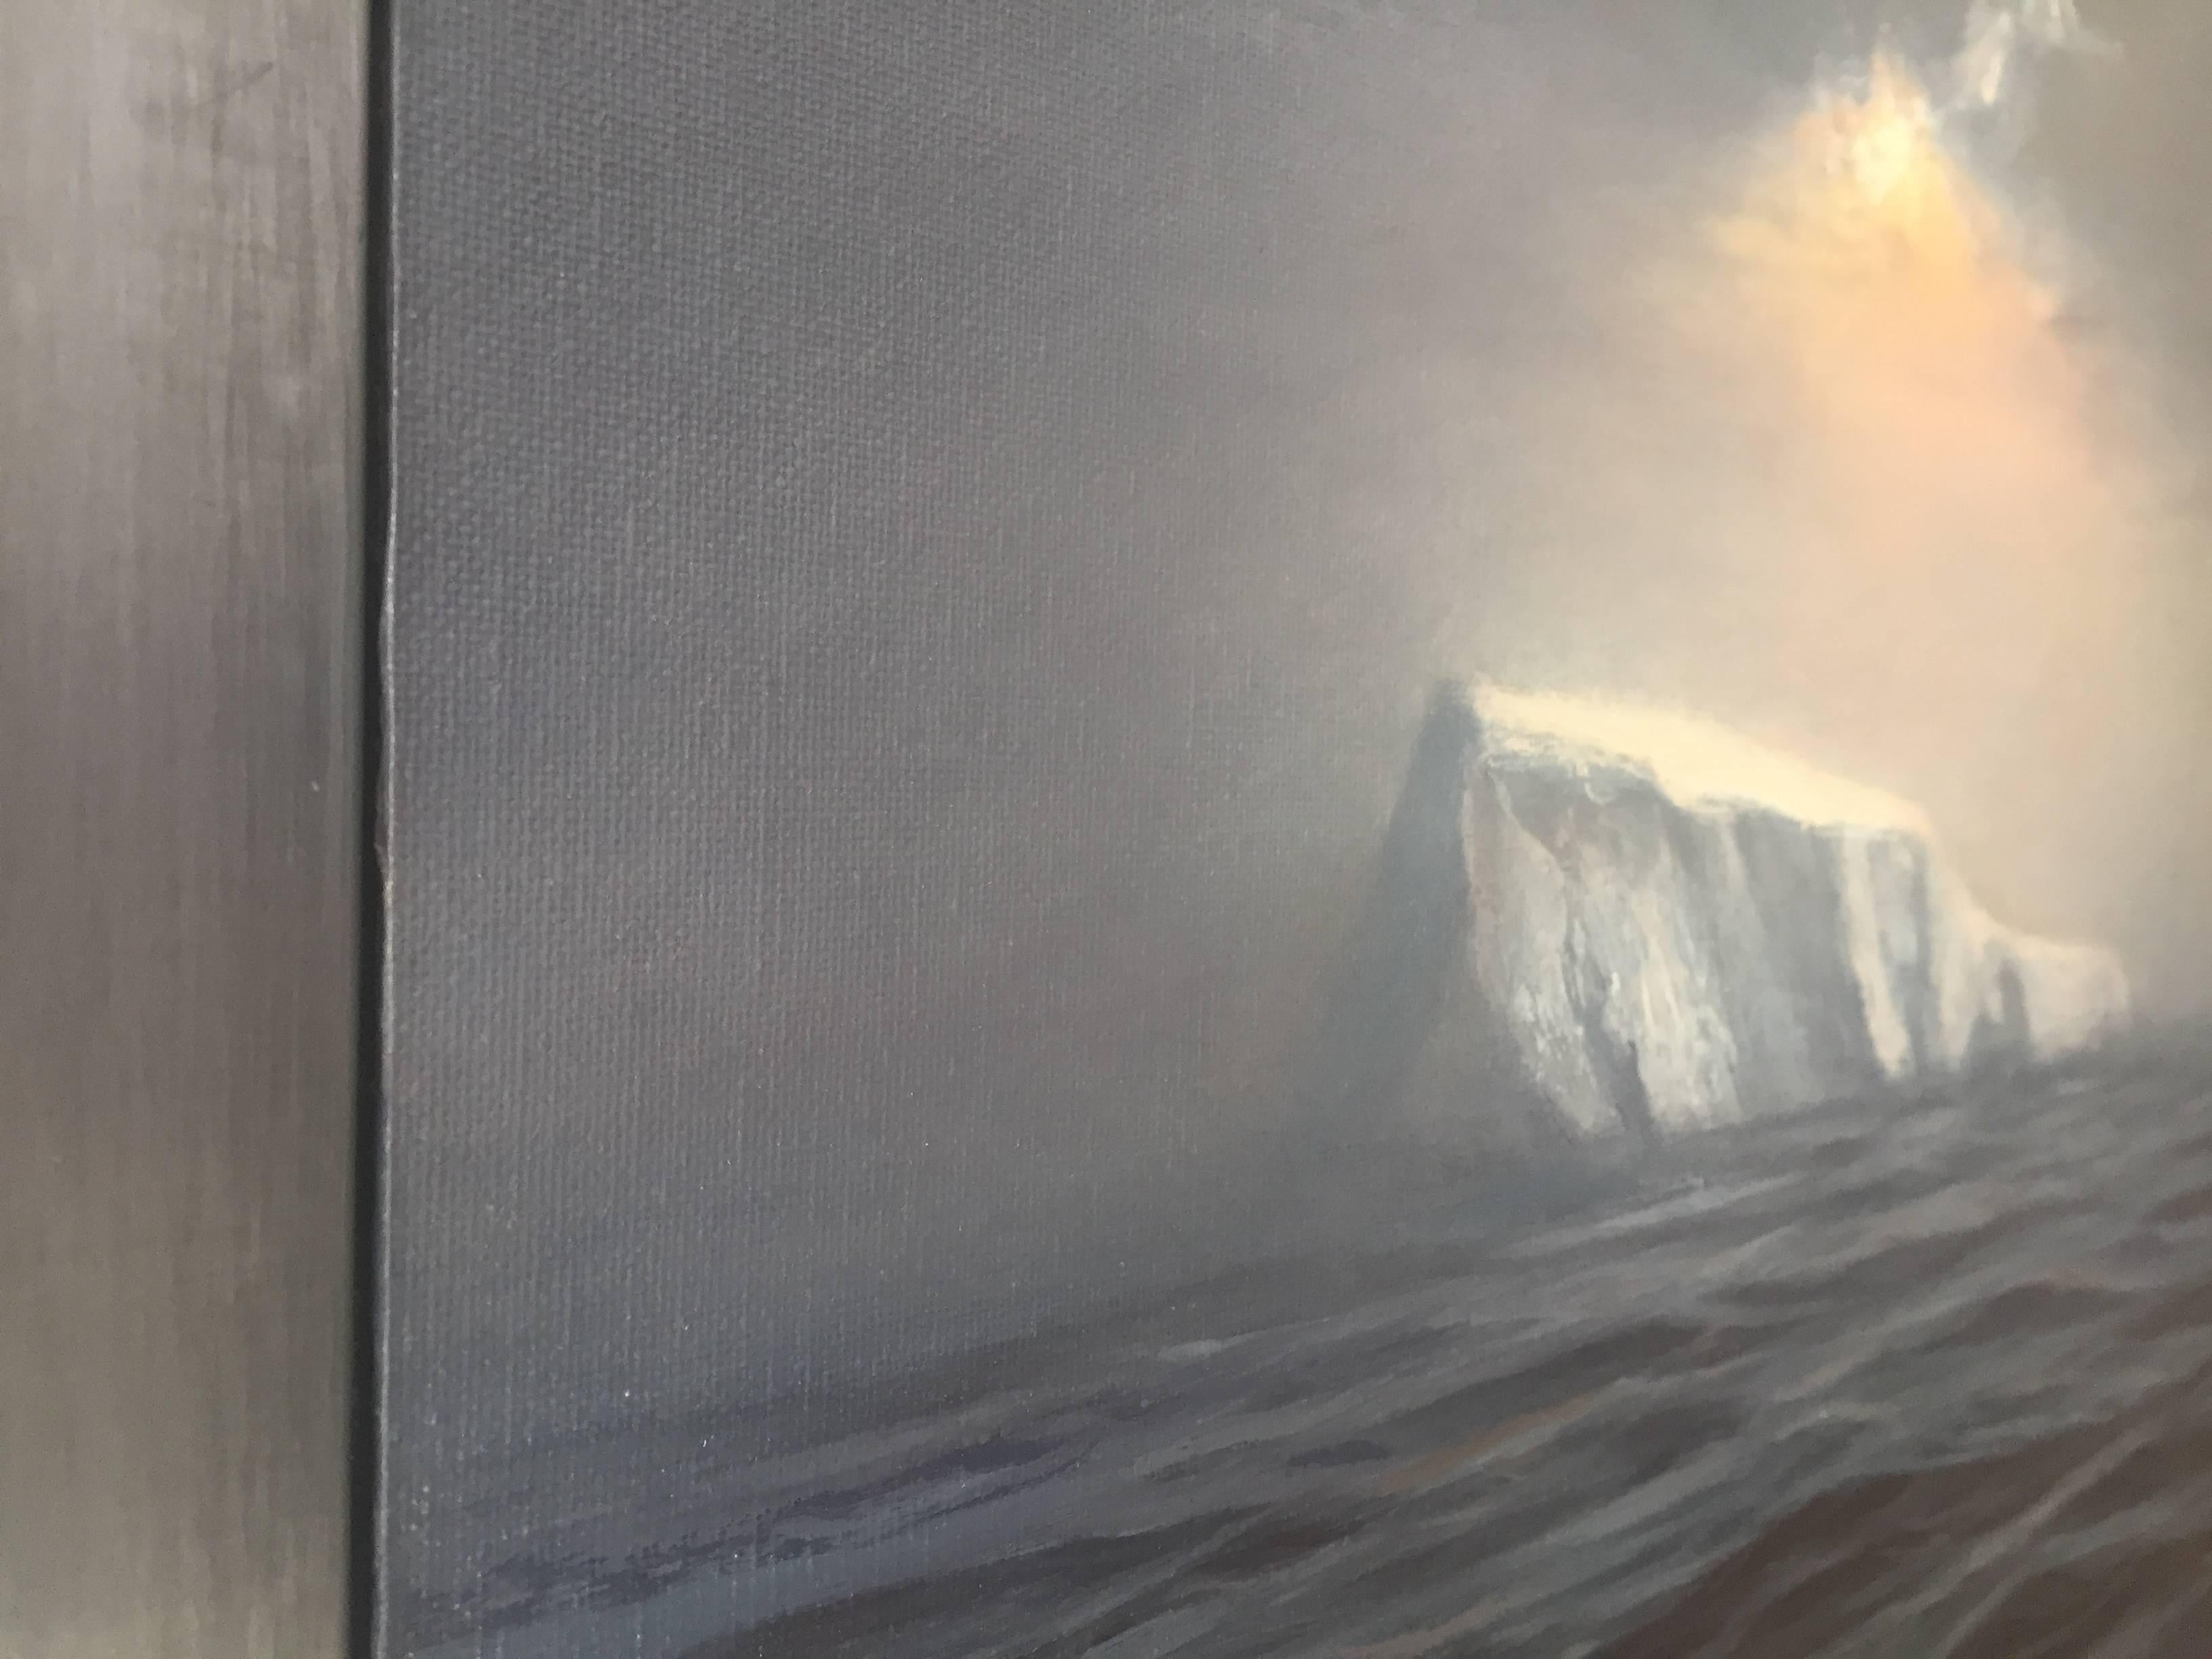 An oil painting encased in a lead frame. An iceberg peaks out of the dark, vast ocean. Strong geometric forms strike with weight against the fluidity of water, and glisten in reflection of the glowing golden skylight above. Light peeks out from an